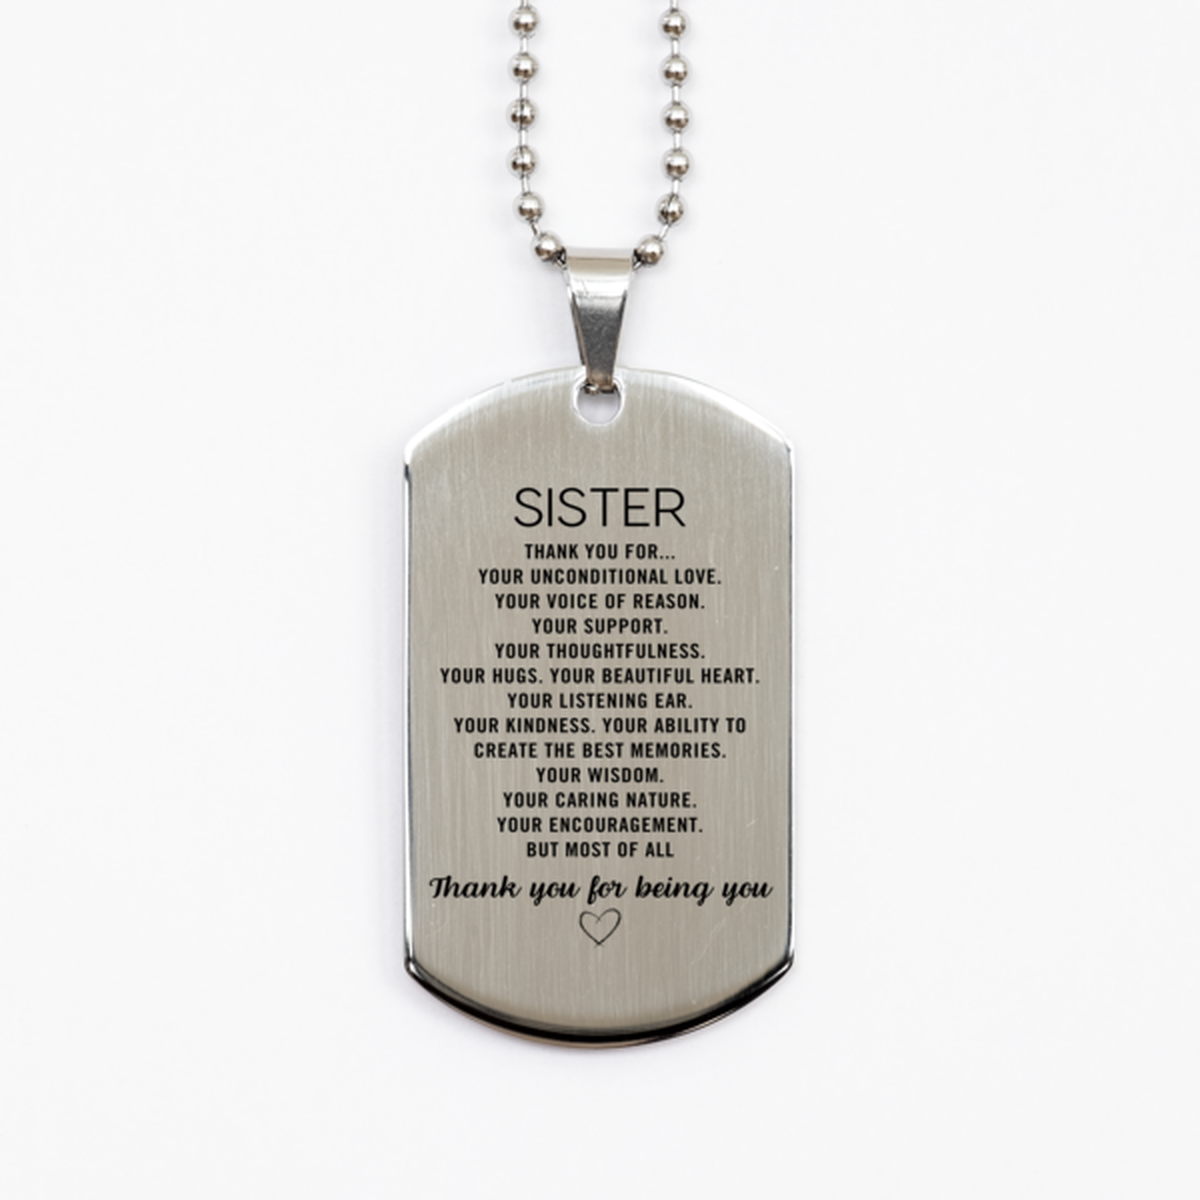 Sister Silver Dog Tag Custom, Engraved Gifts For Sister Christmas Graduation Birthday Gifts for Men Women Sister Thank you for Your unconditional love